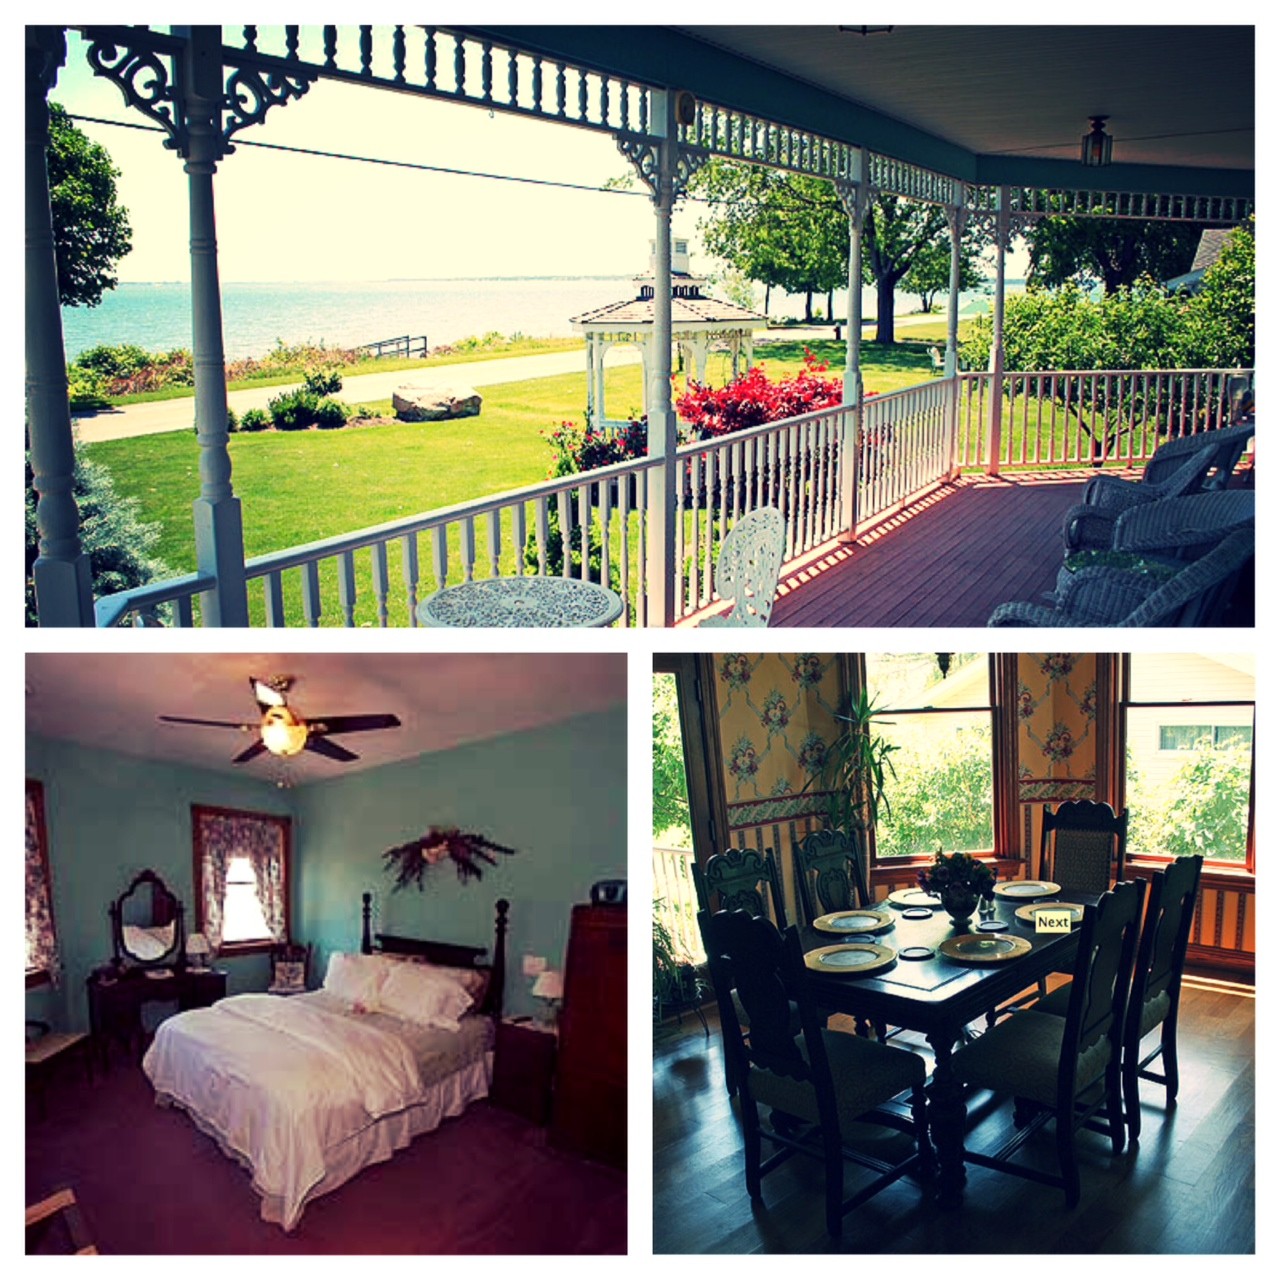 This luxury B&B has been featured on The Today Show and in Travel and Leisure Magazine. Its best-selling features include 360 degree unobstructed lakefront views, evening hors d’oureves, and hot tub spas.
http://watersedgeretreat.com/